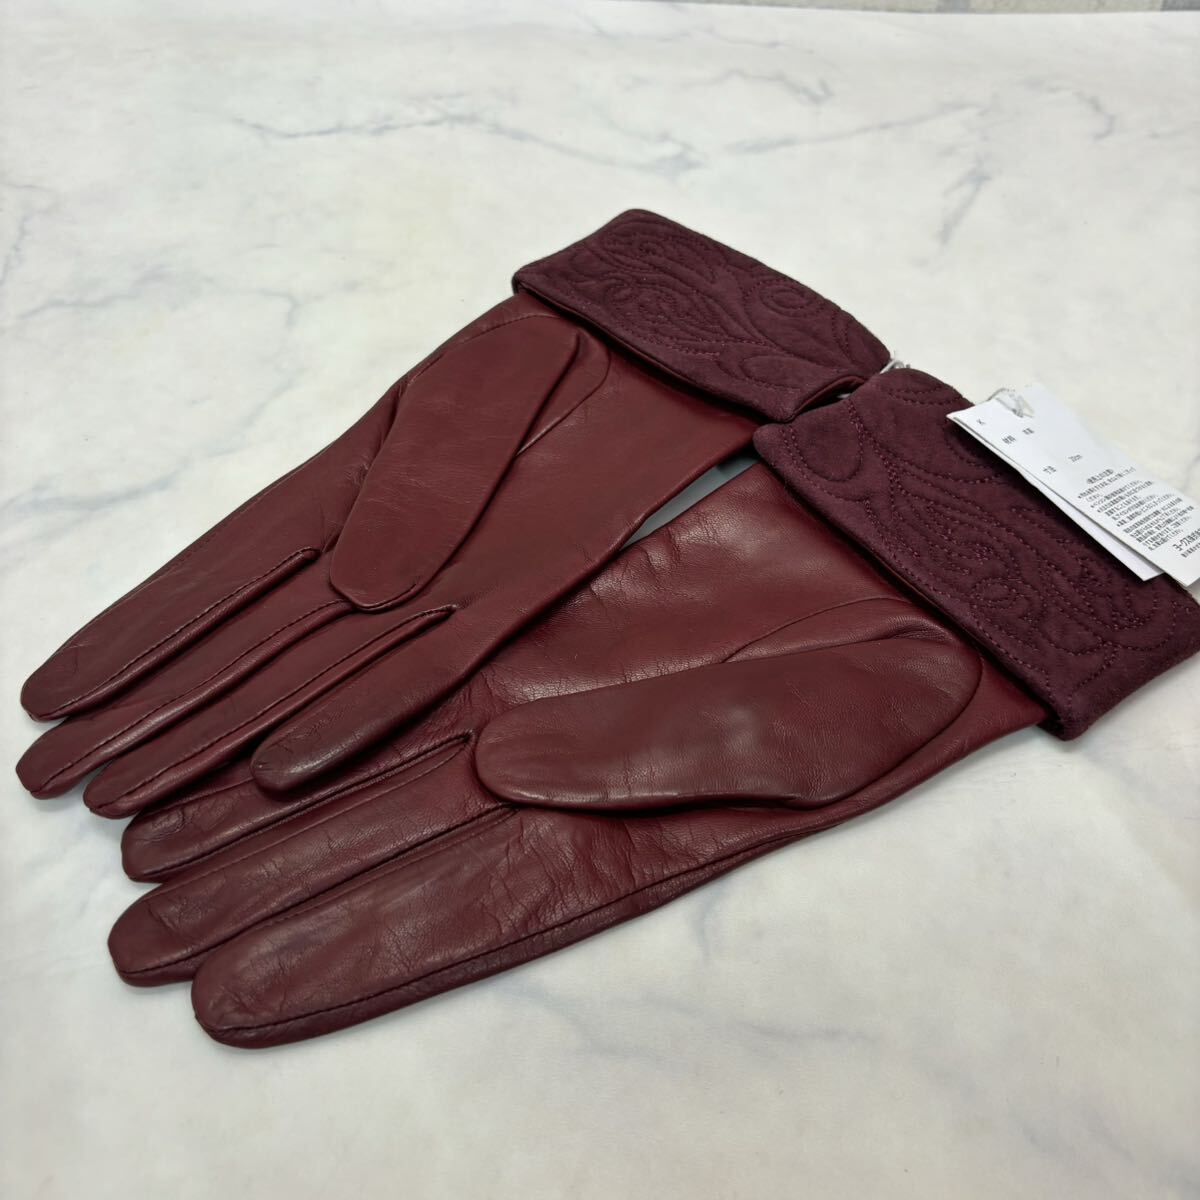  tag equipped Givenchy sheep leather glove leather gloves wine red lady's original leather 20. bordeaux 